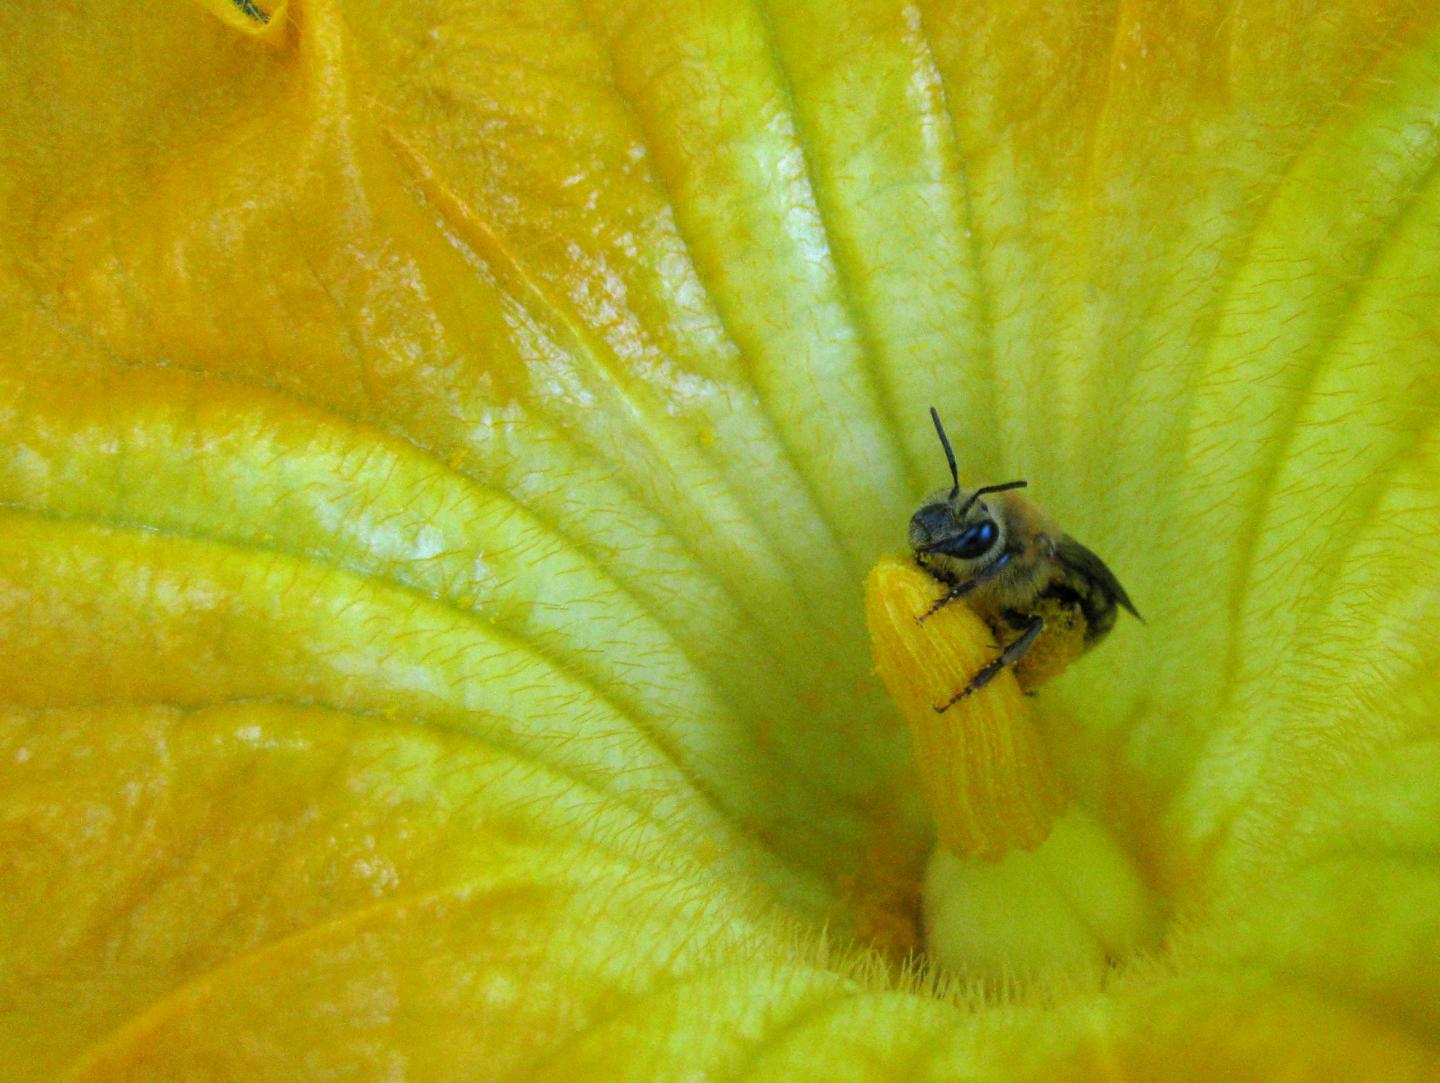 CATCH THE BUZZ – How squash agriculture spread bees in pre-Columbian North America